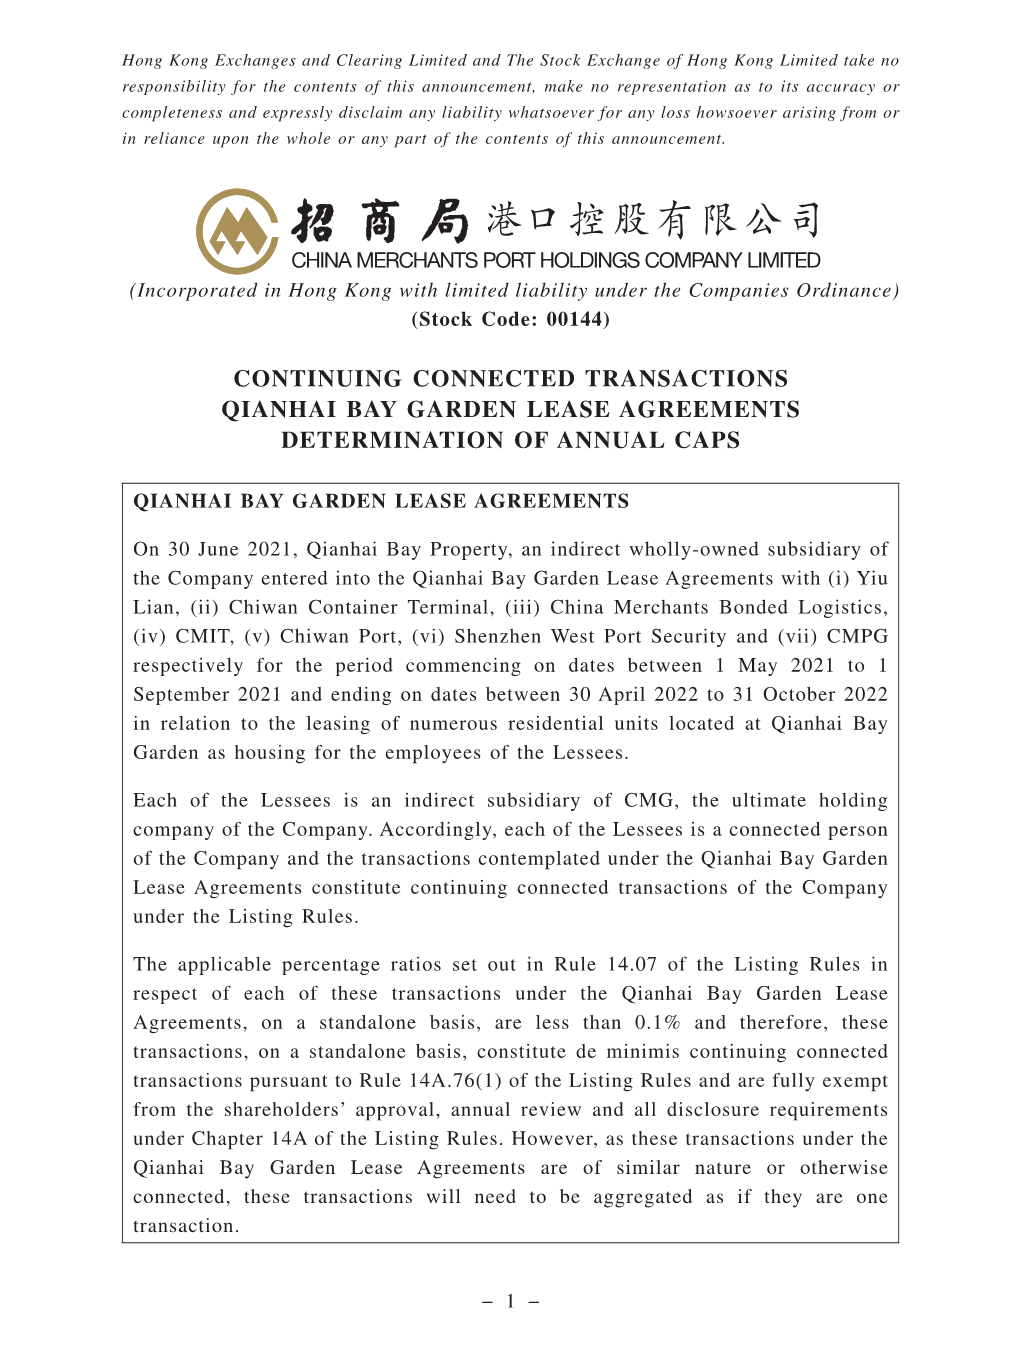 Continuing Connected Transactions Qianhai Bay Garden Lease Agreements Determination of Annual Caps